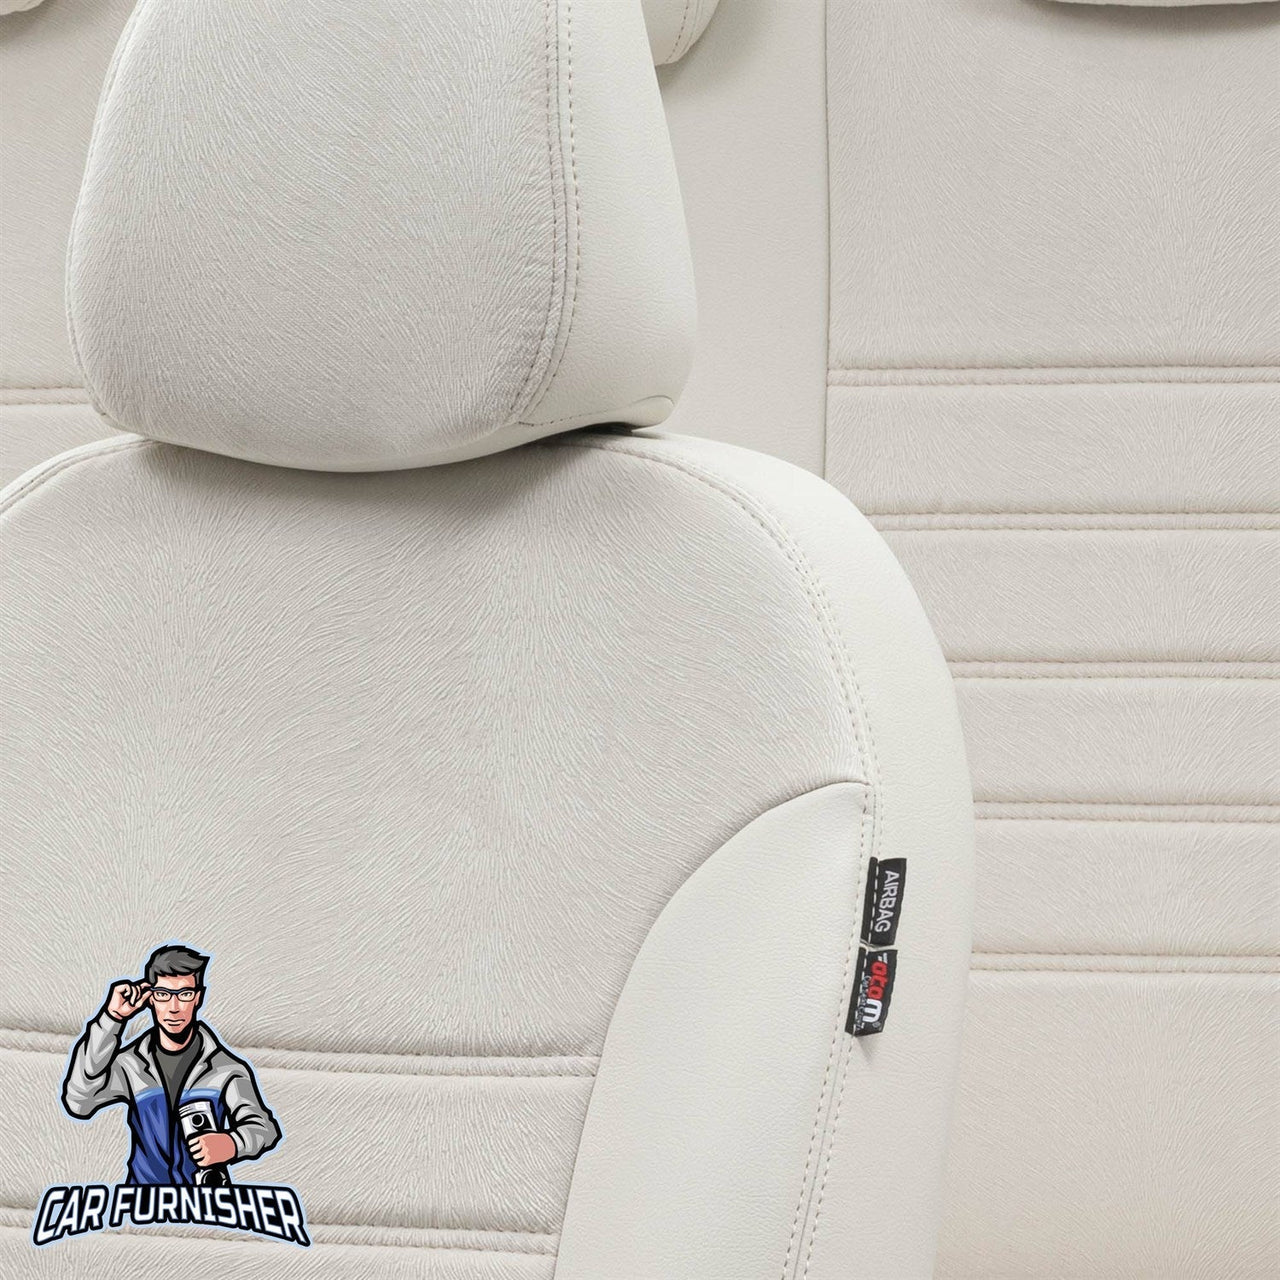 Toyota Land Cruiser Seat Cover London Foal Feather Design Ivory Leather & Foal Feather